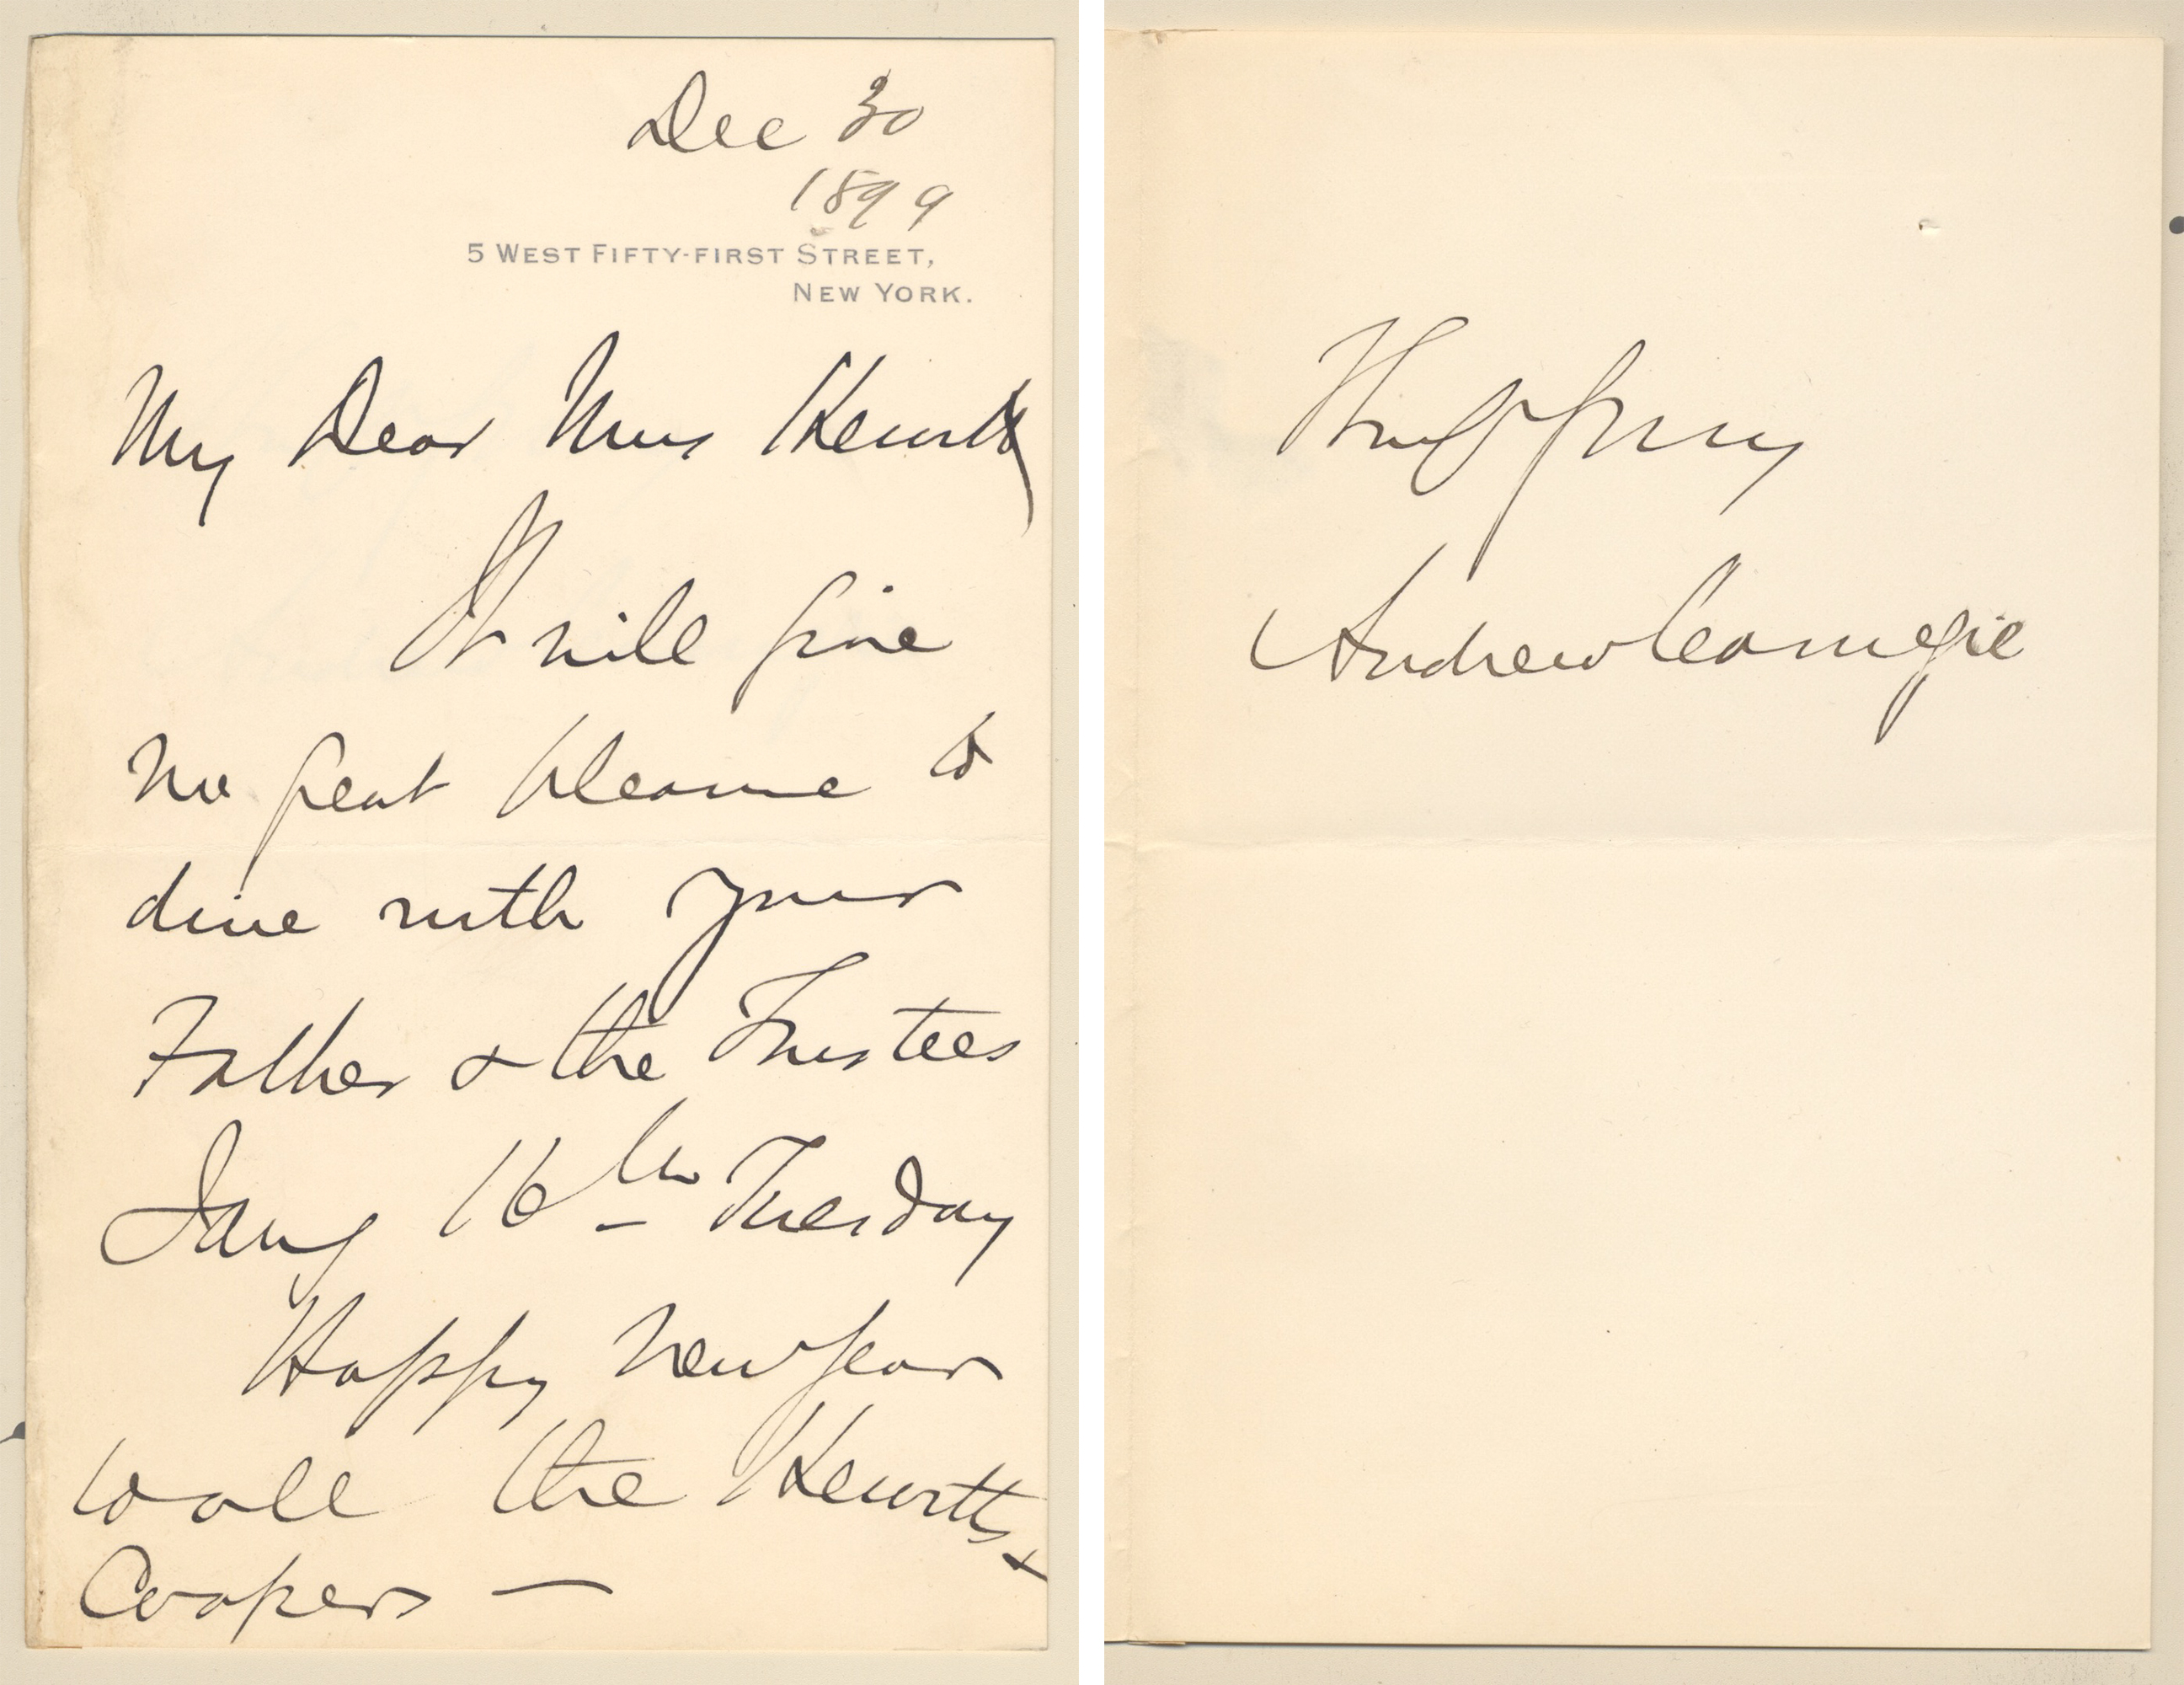 Composite image of two pages of a letter side by side. The page on the left contains nine lines of handwritten text, the date of 